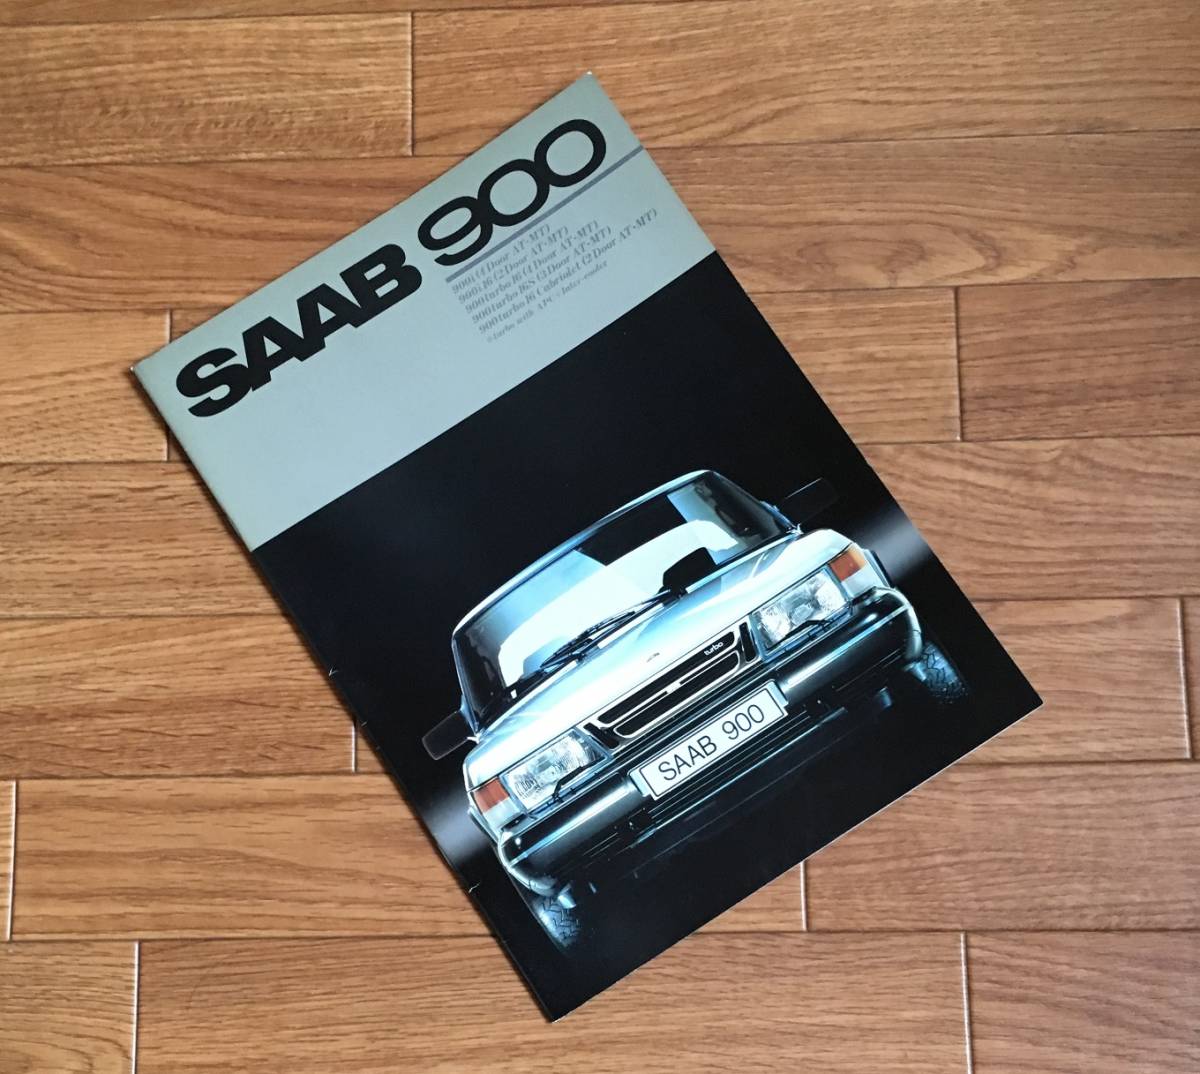  Saab 900 SAAB 900 catalog pamphlet 900 turbo 16S foreign automobile imported car imported car car cabriolet turbo Sweden SAAB 900 series 